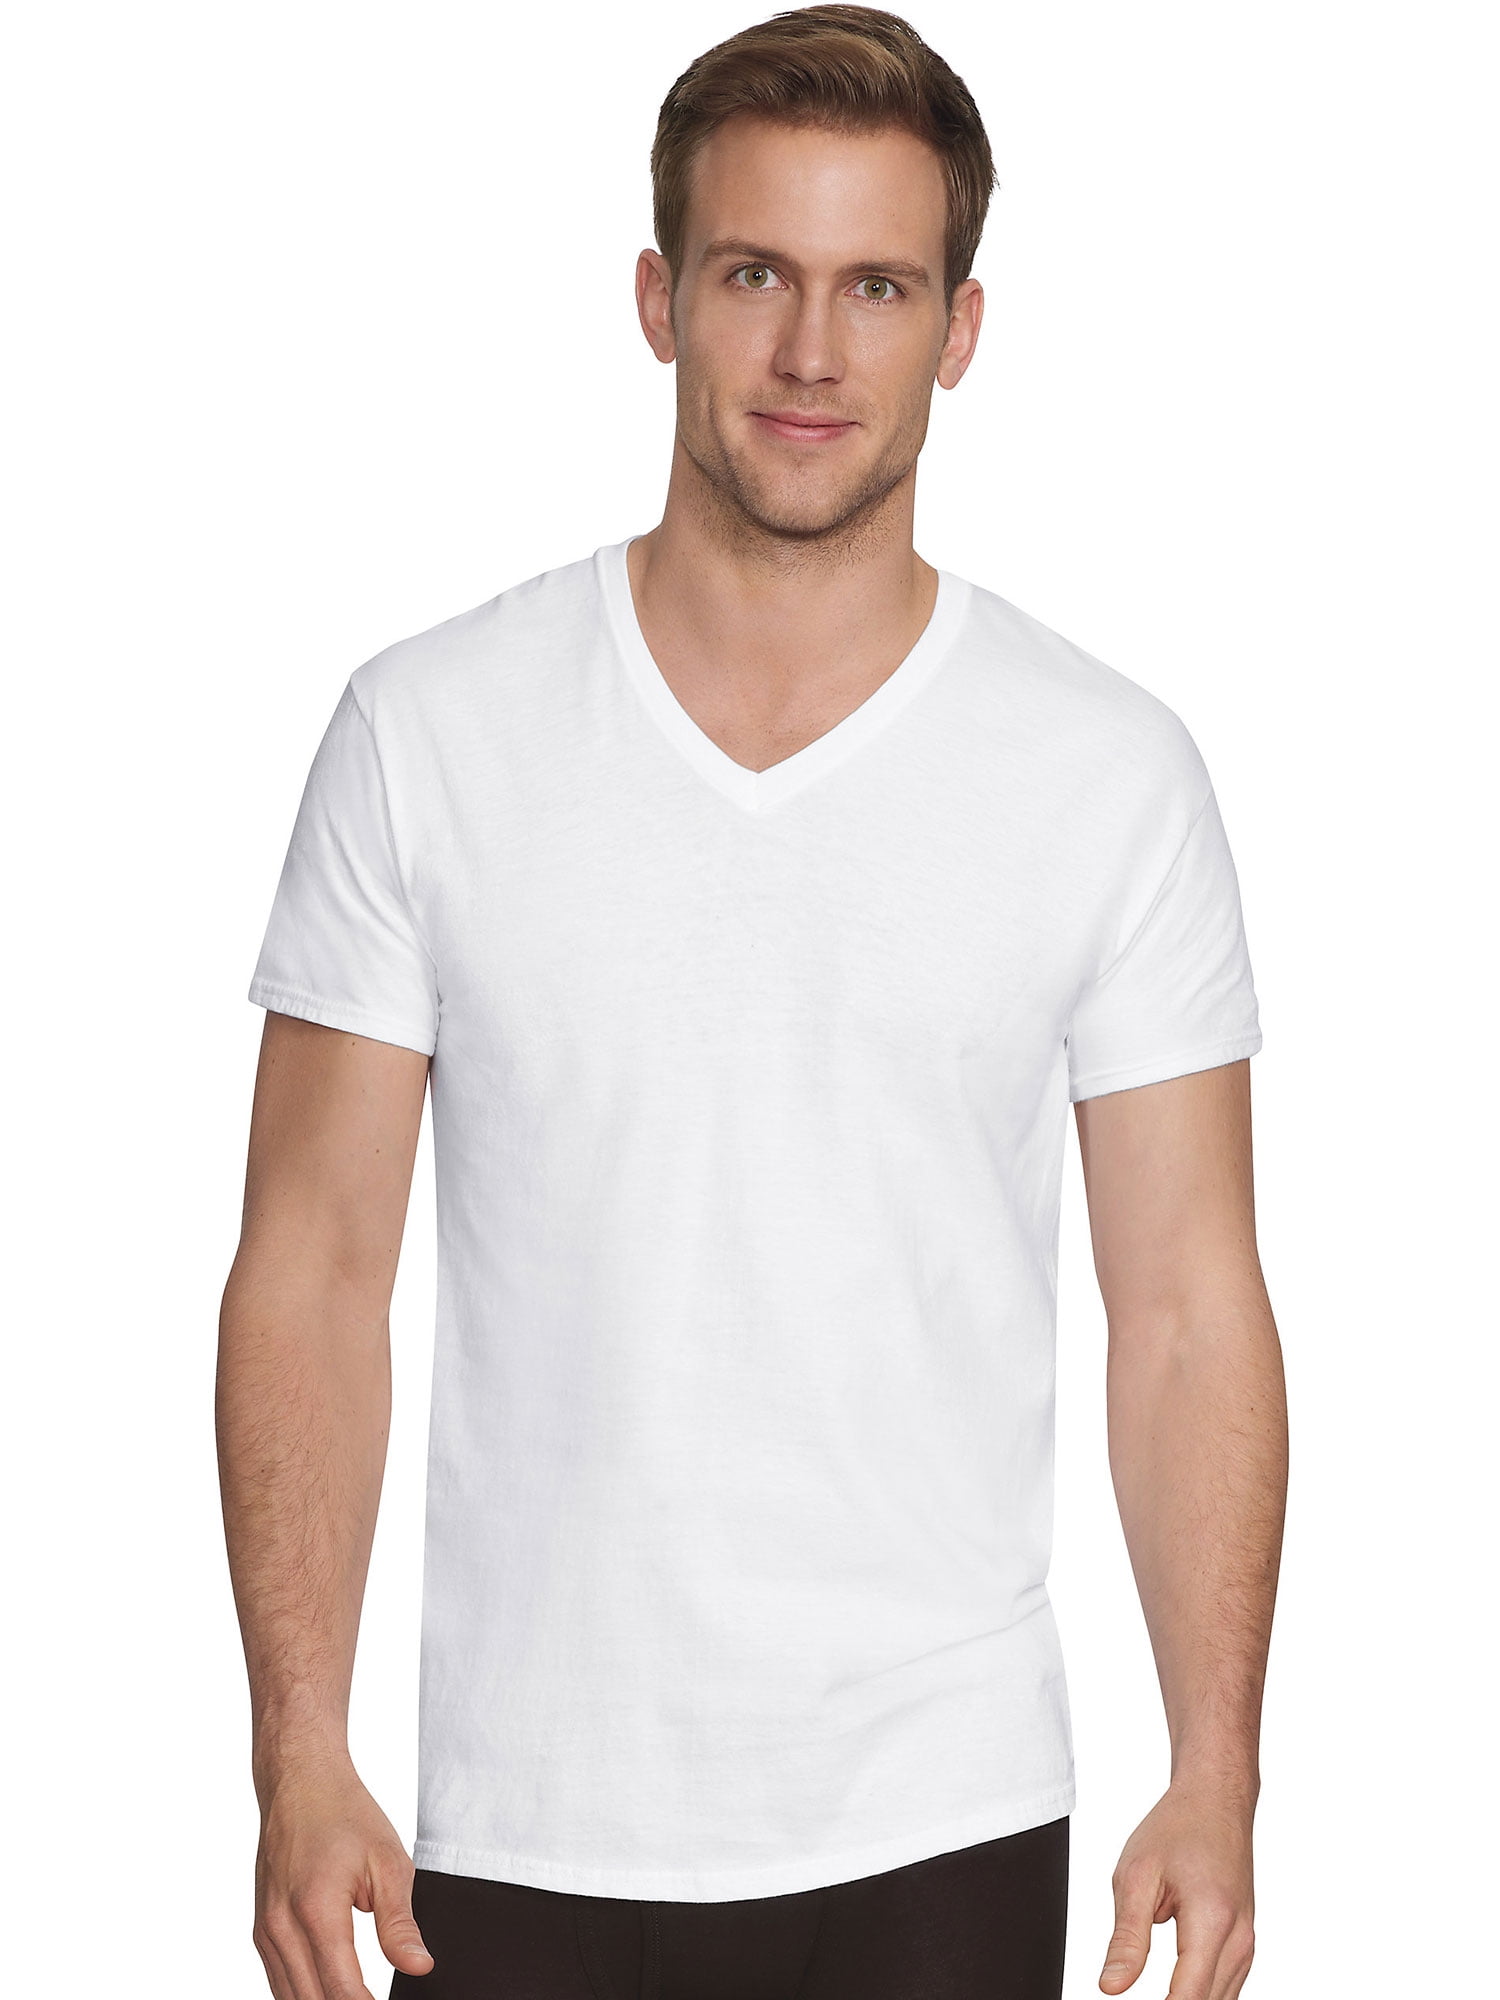 Cuts Hanes Men's Classics 10 Pack Of Tees Size L V Neck With Defects scuffs 